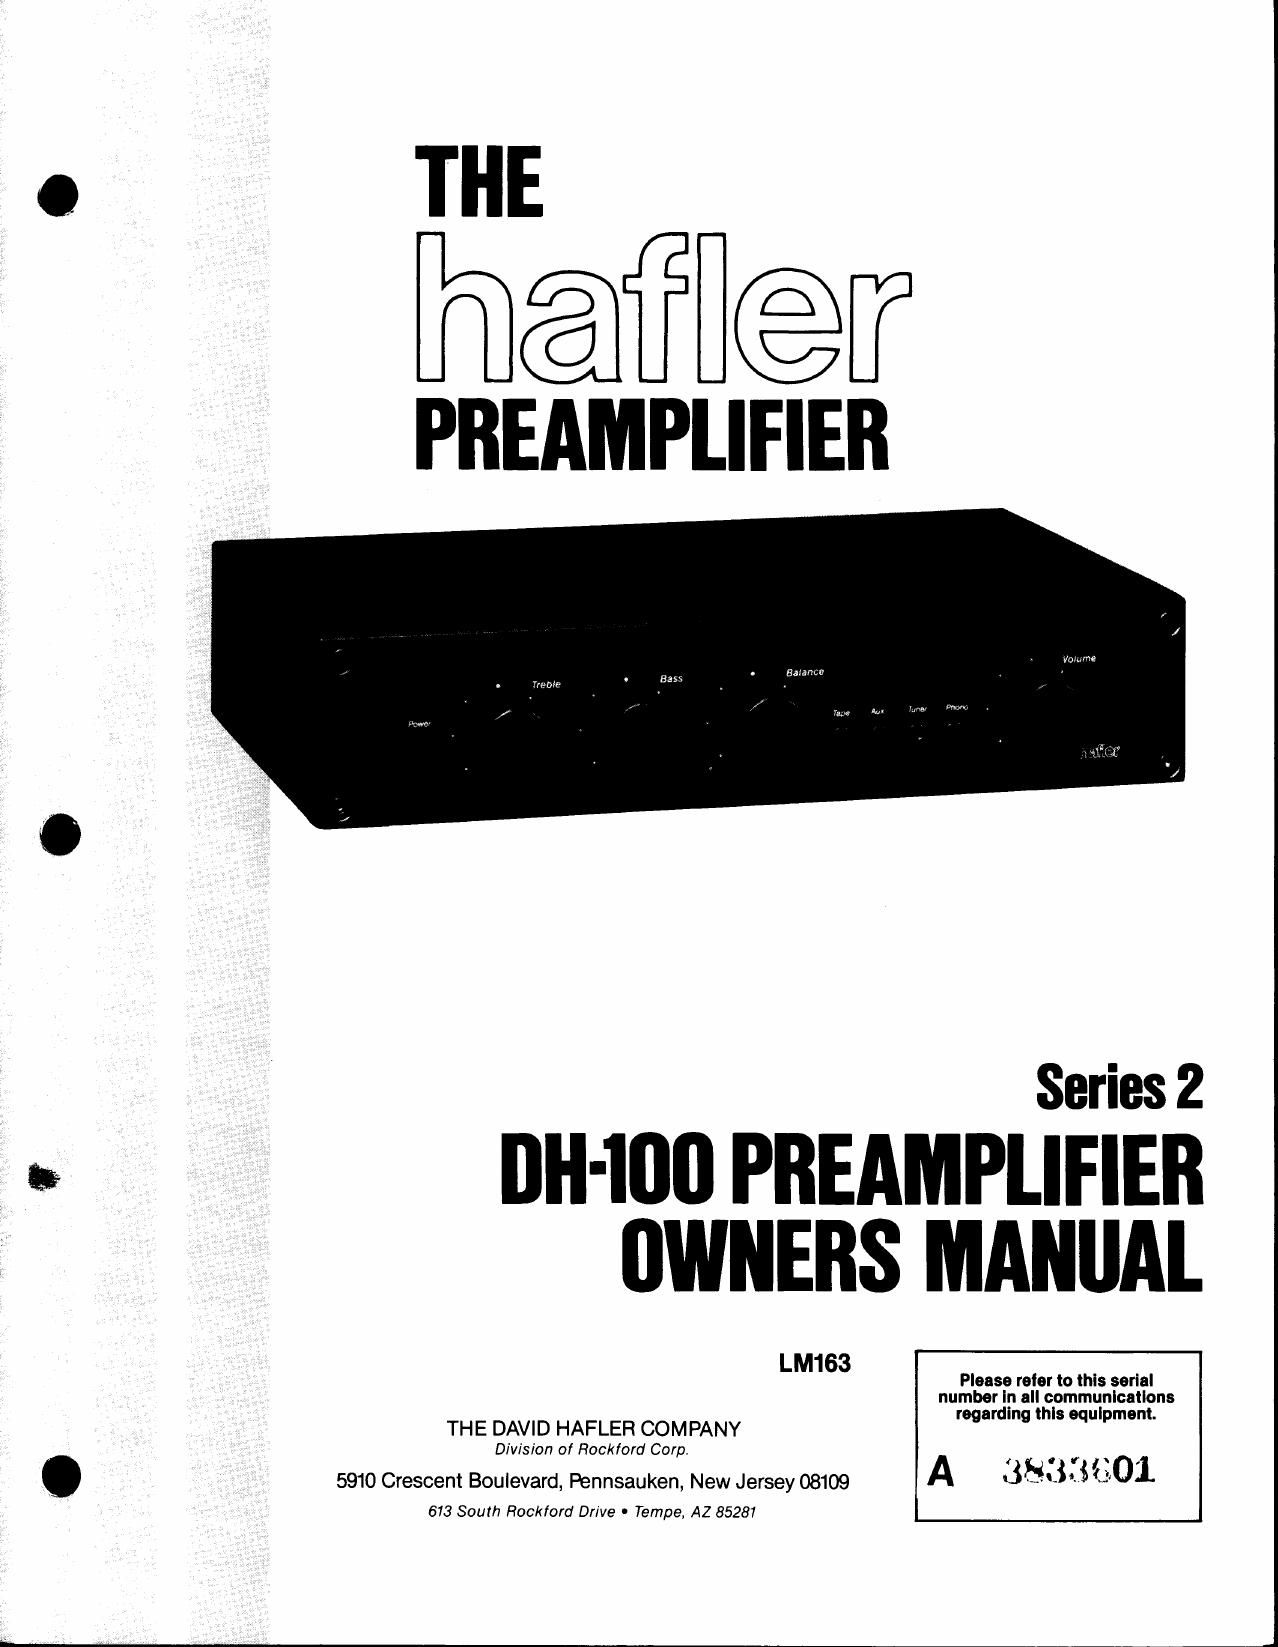 Hafler DH 100 Owners Manual